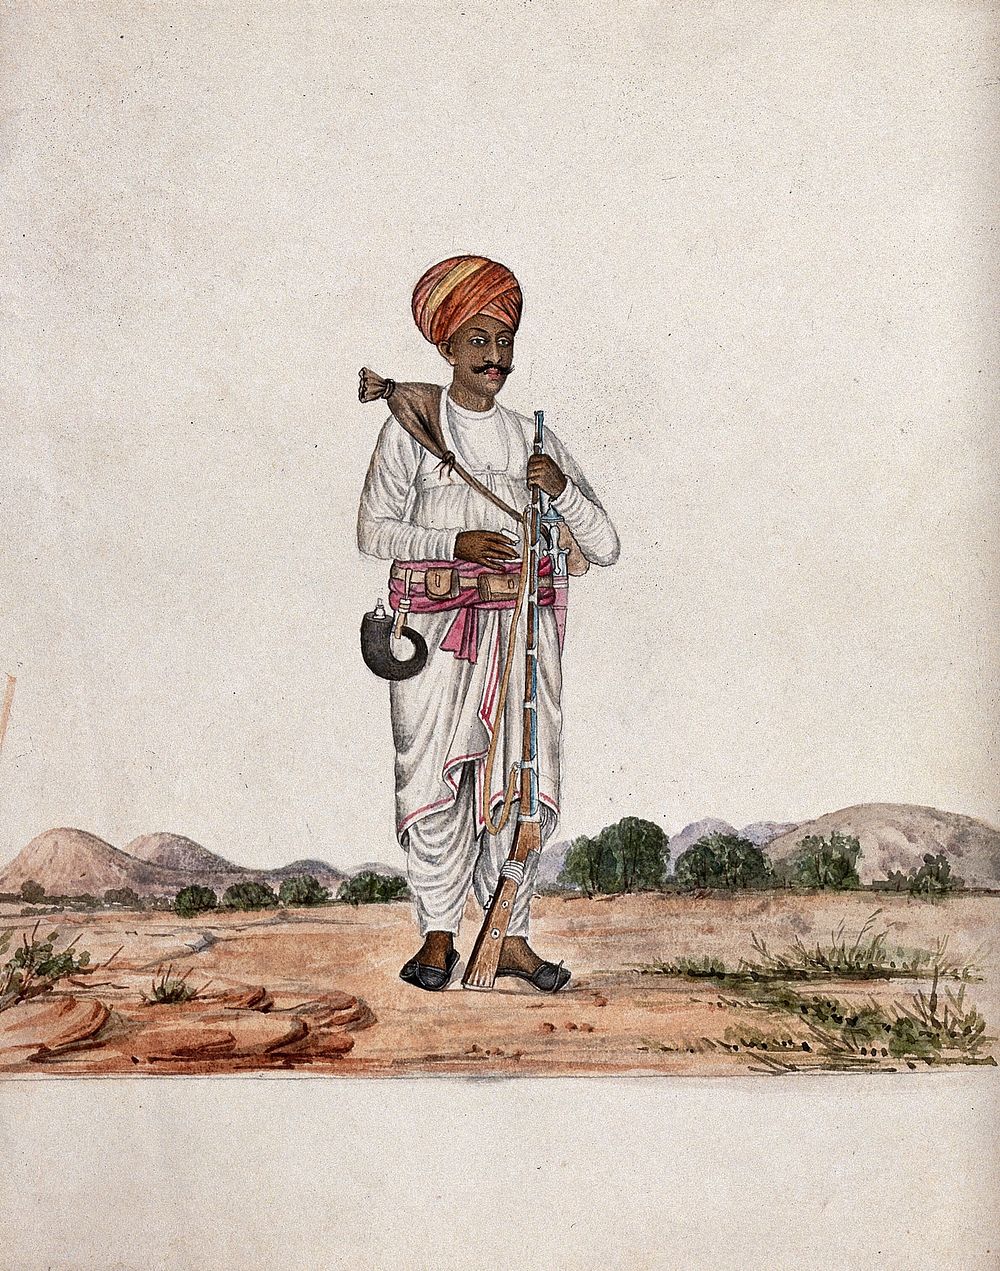 A man in the desert carrying a rifle in one hand and a water pouch over his shoulder. Gouache painting by an Indian artist.